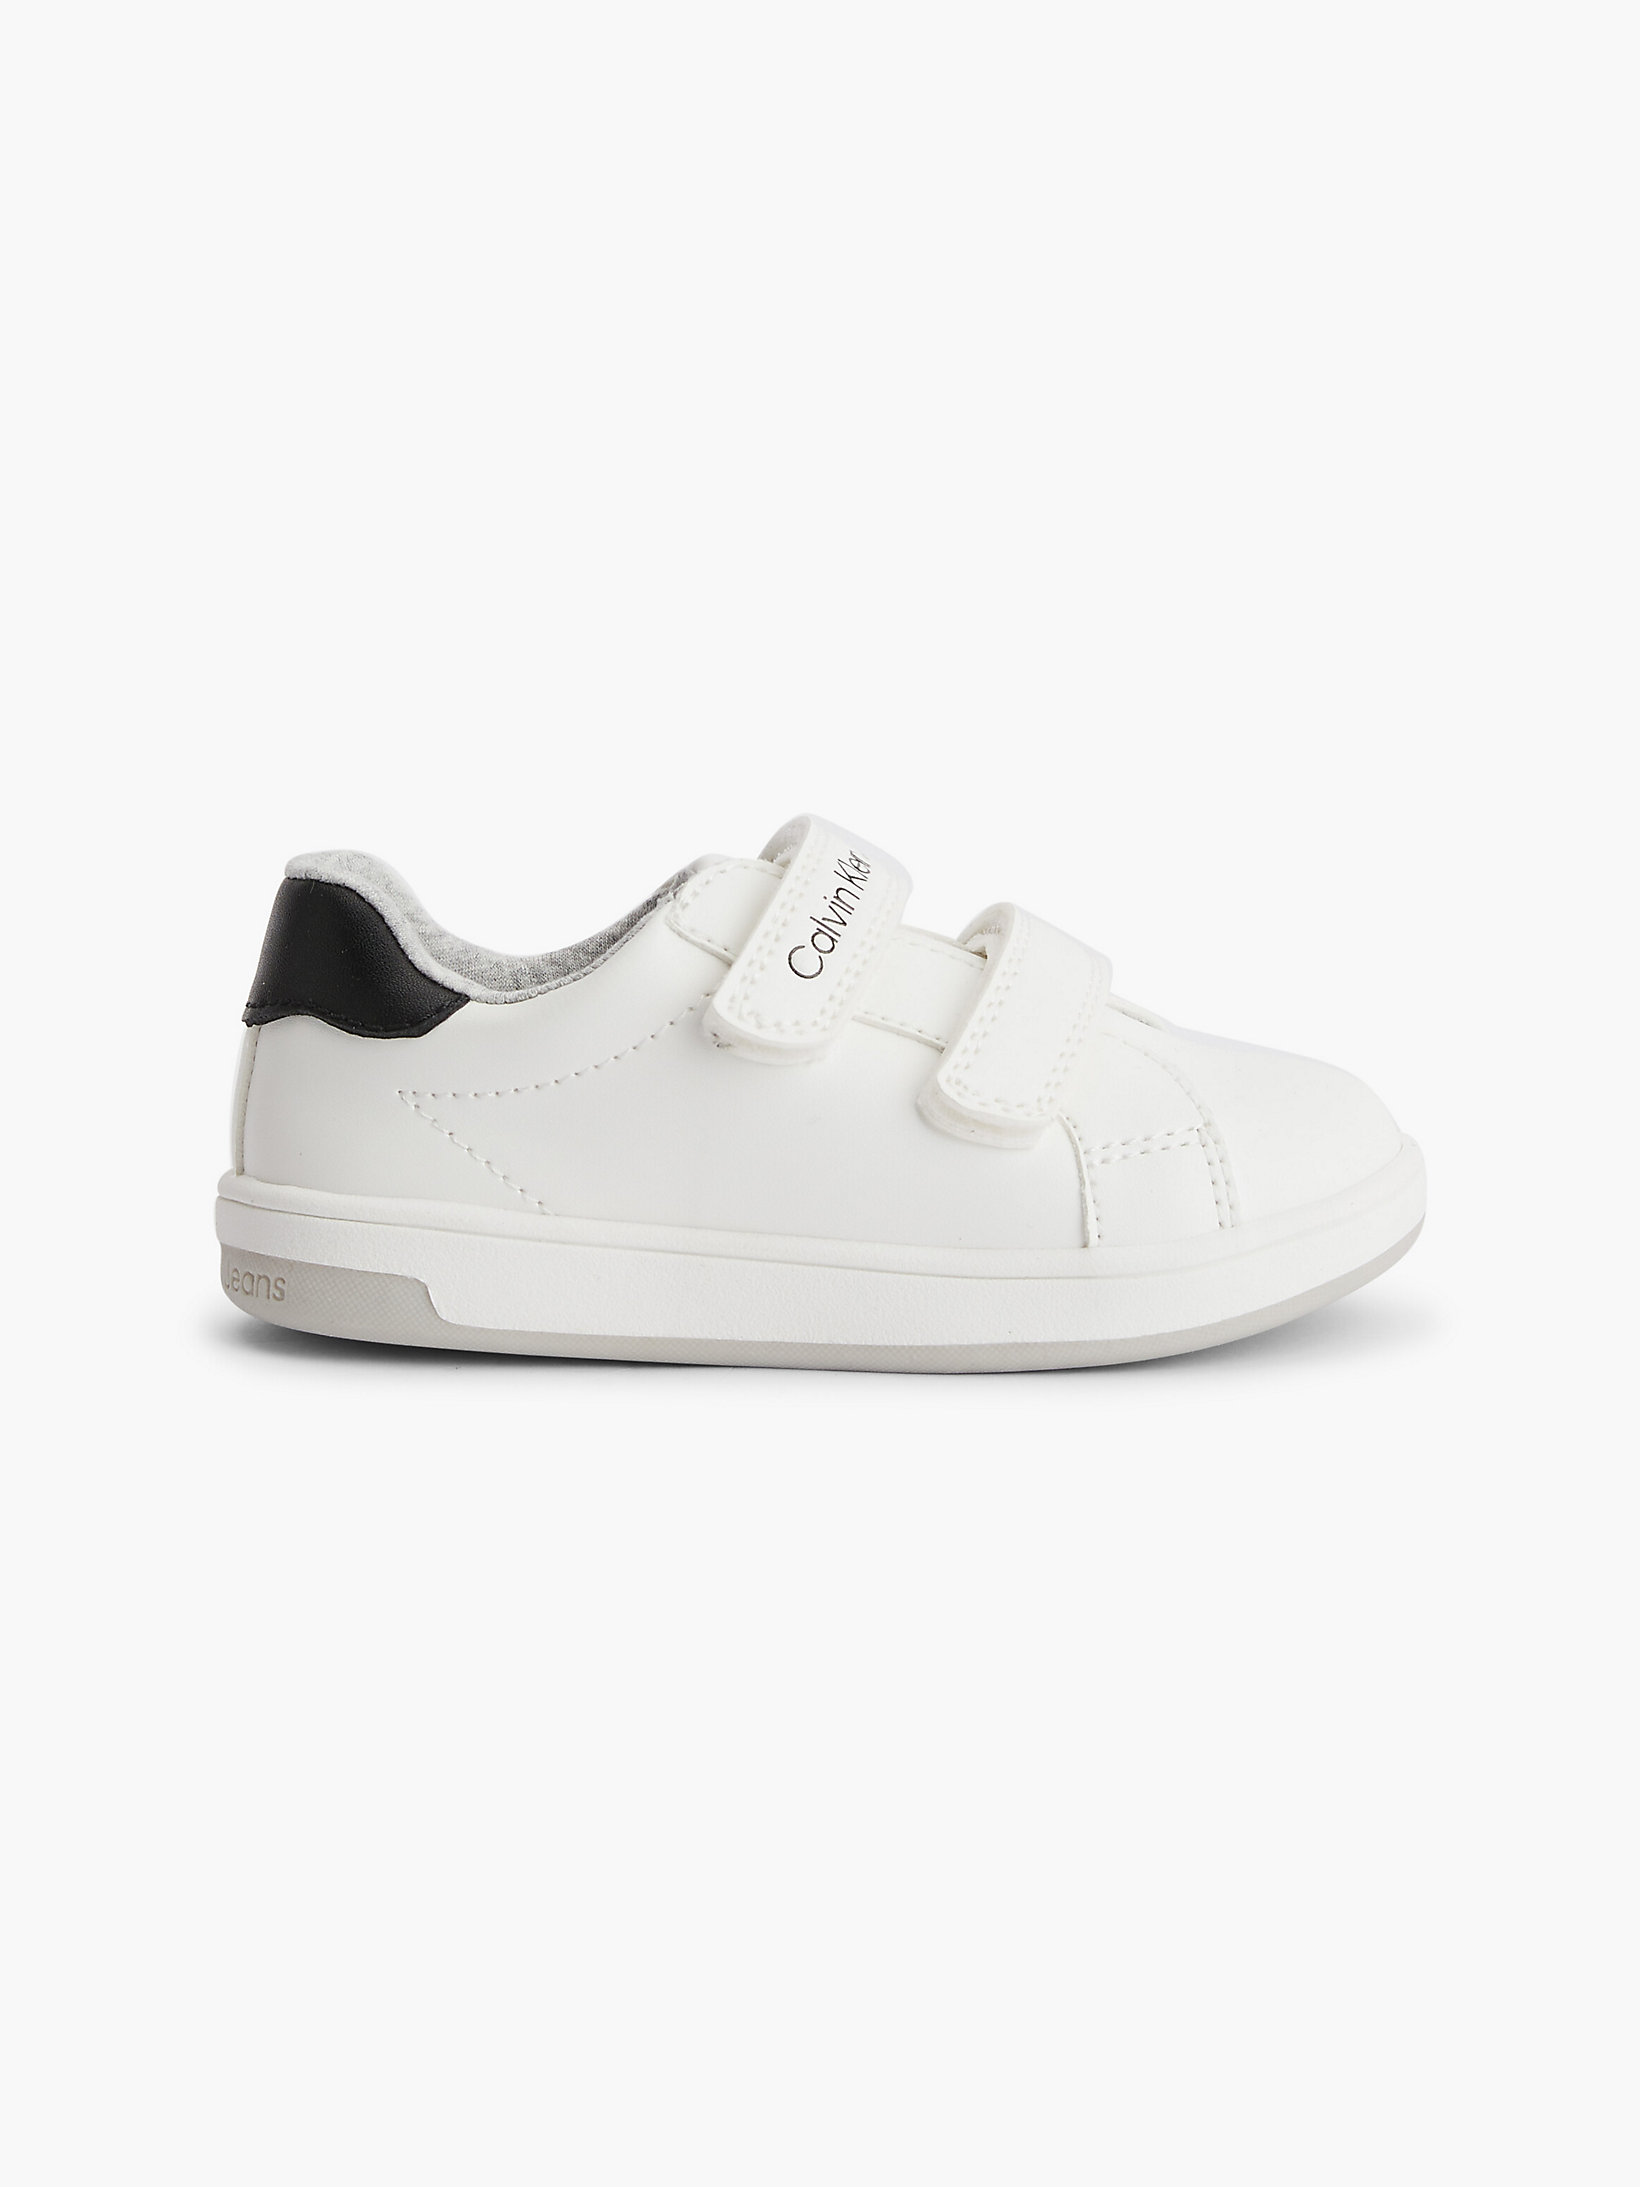 White / Black Recycled Trainers undefined kids unisex Calvin Klein